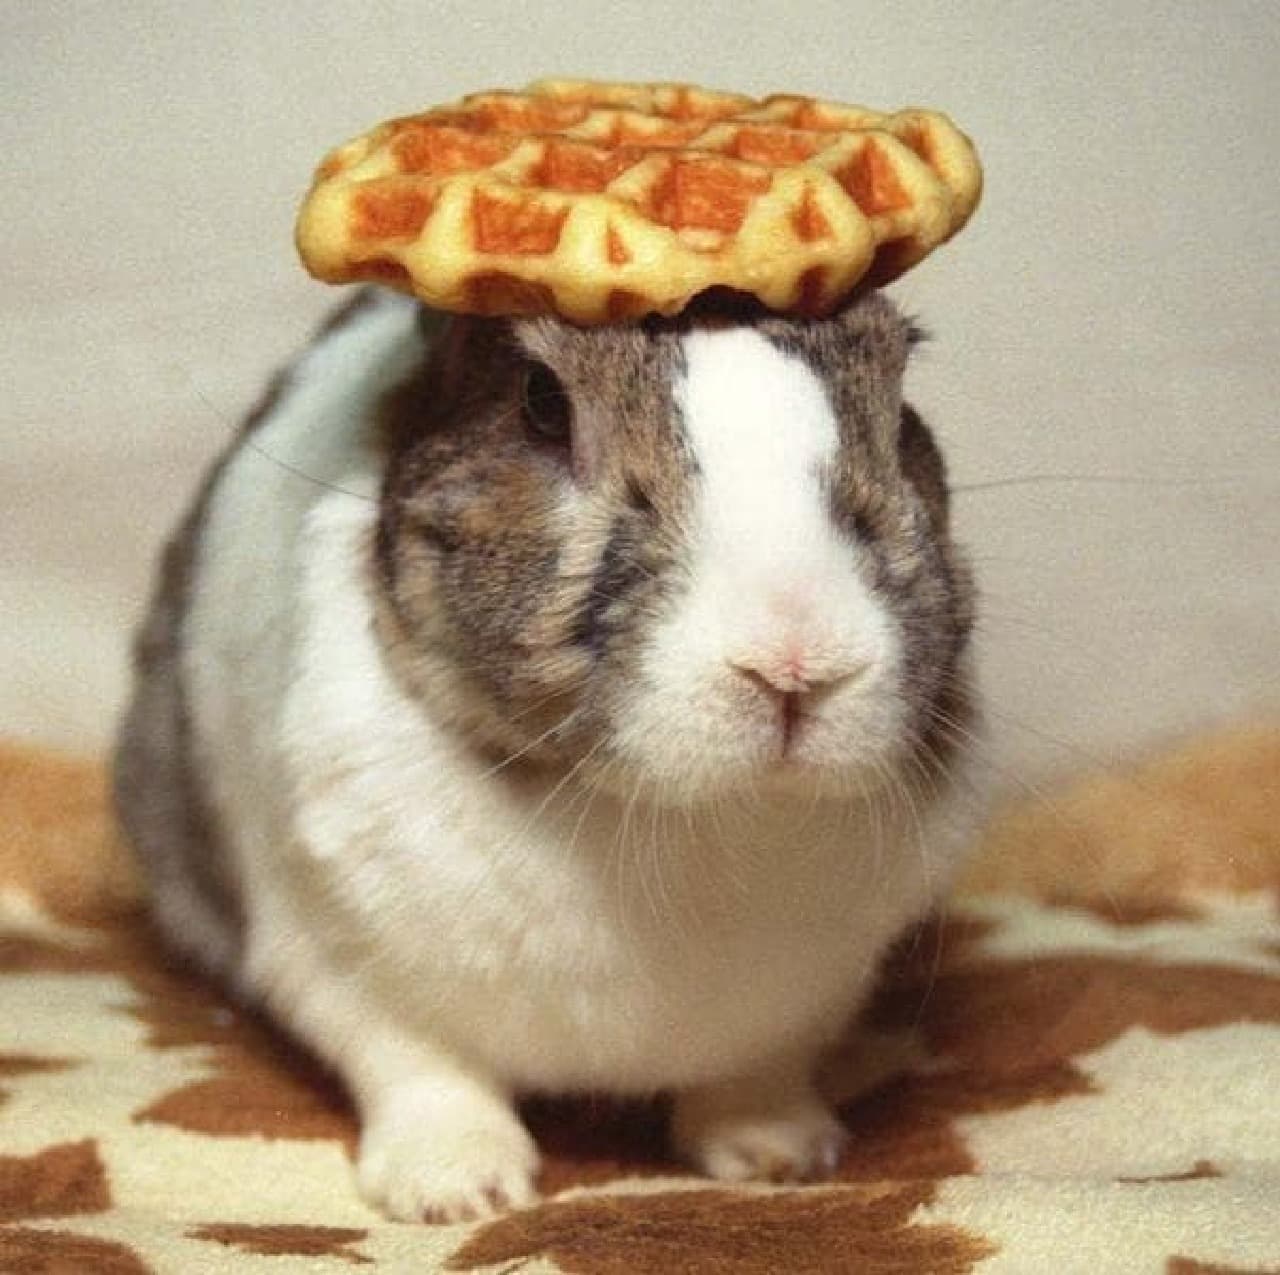 This is Mr. Oolong. I have a waffle on my head